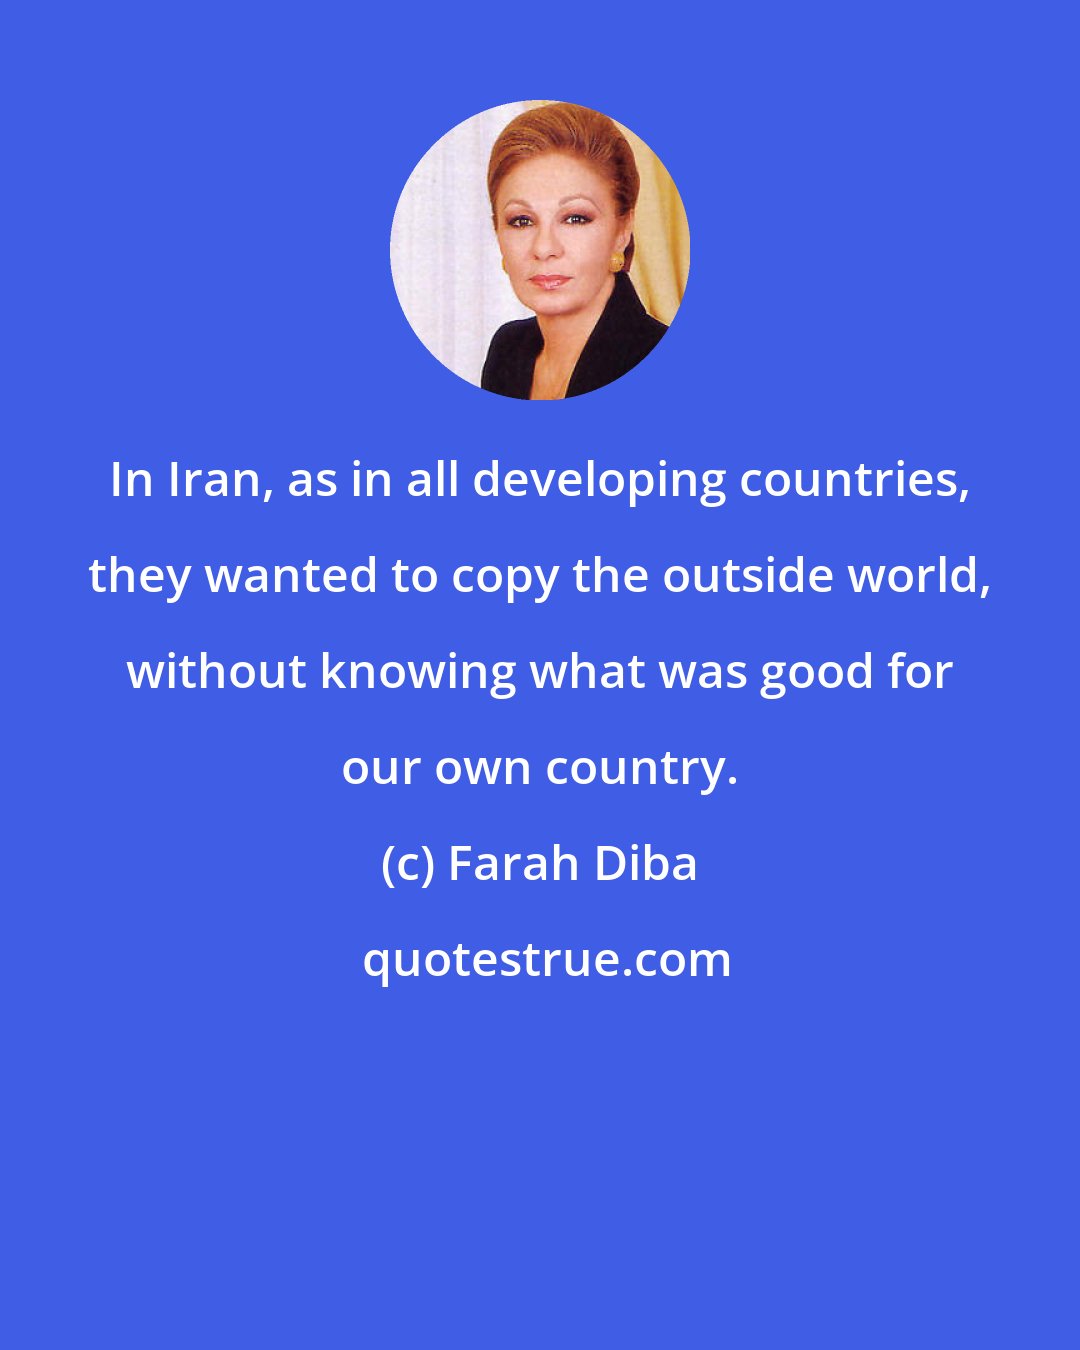 Farah Diba: In Iran, as in all developing countries, they wanted to copy the outside world, without knowing what was good for our own country.